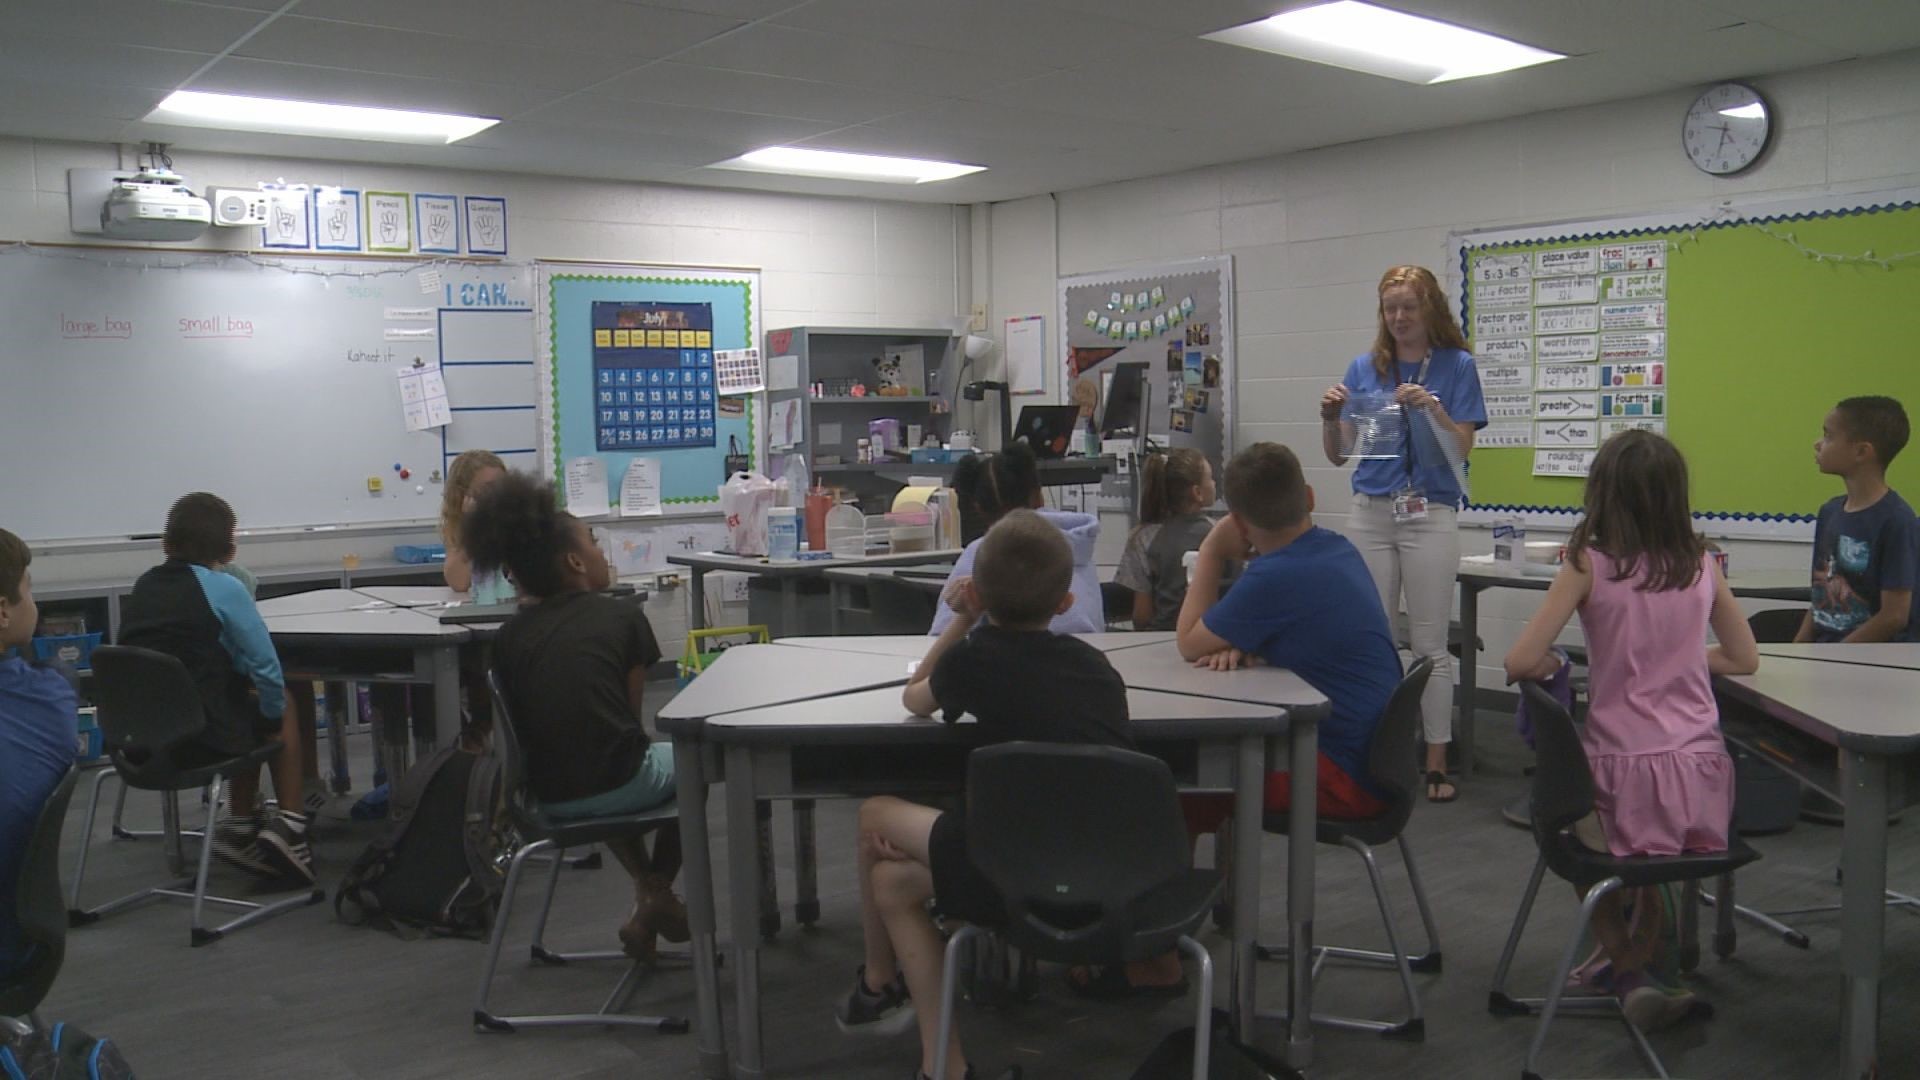 Muskegon Public Schools has had its hands full only weeks before classes are set to resume for the new school year.